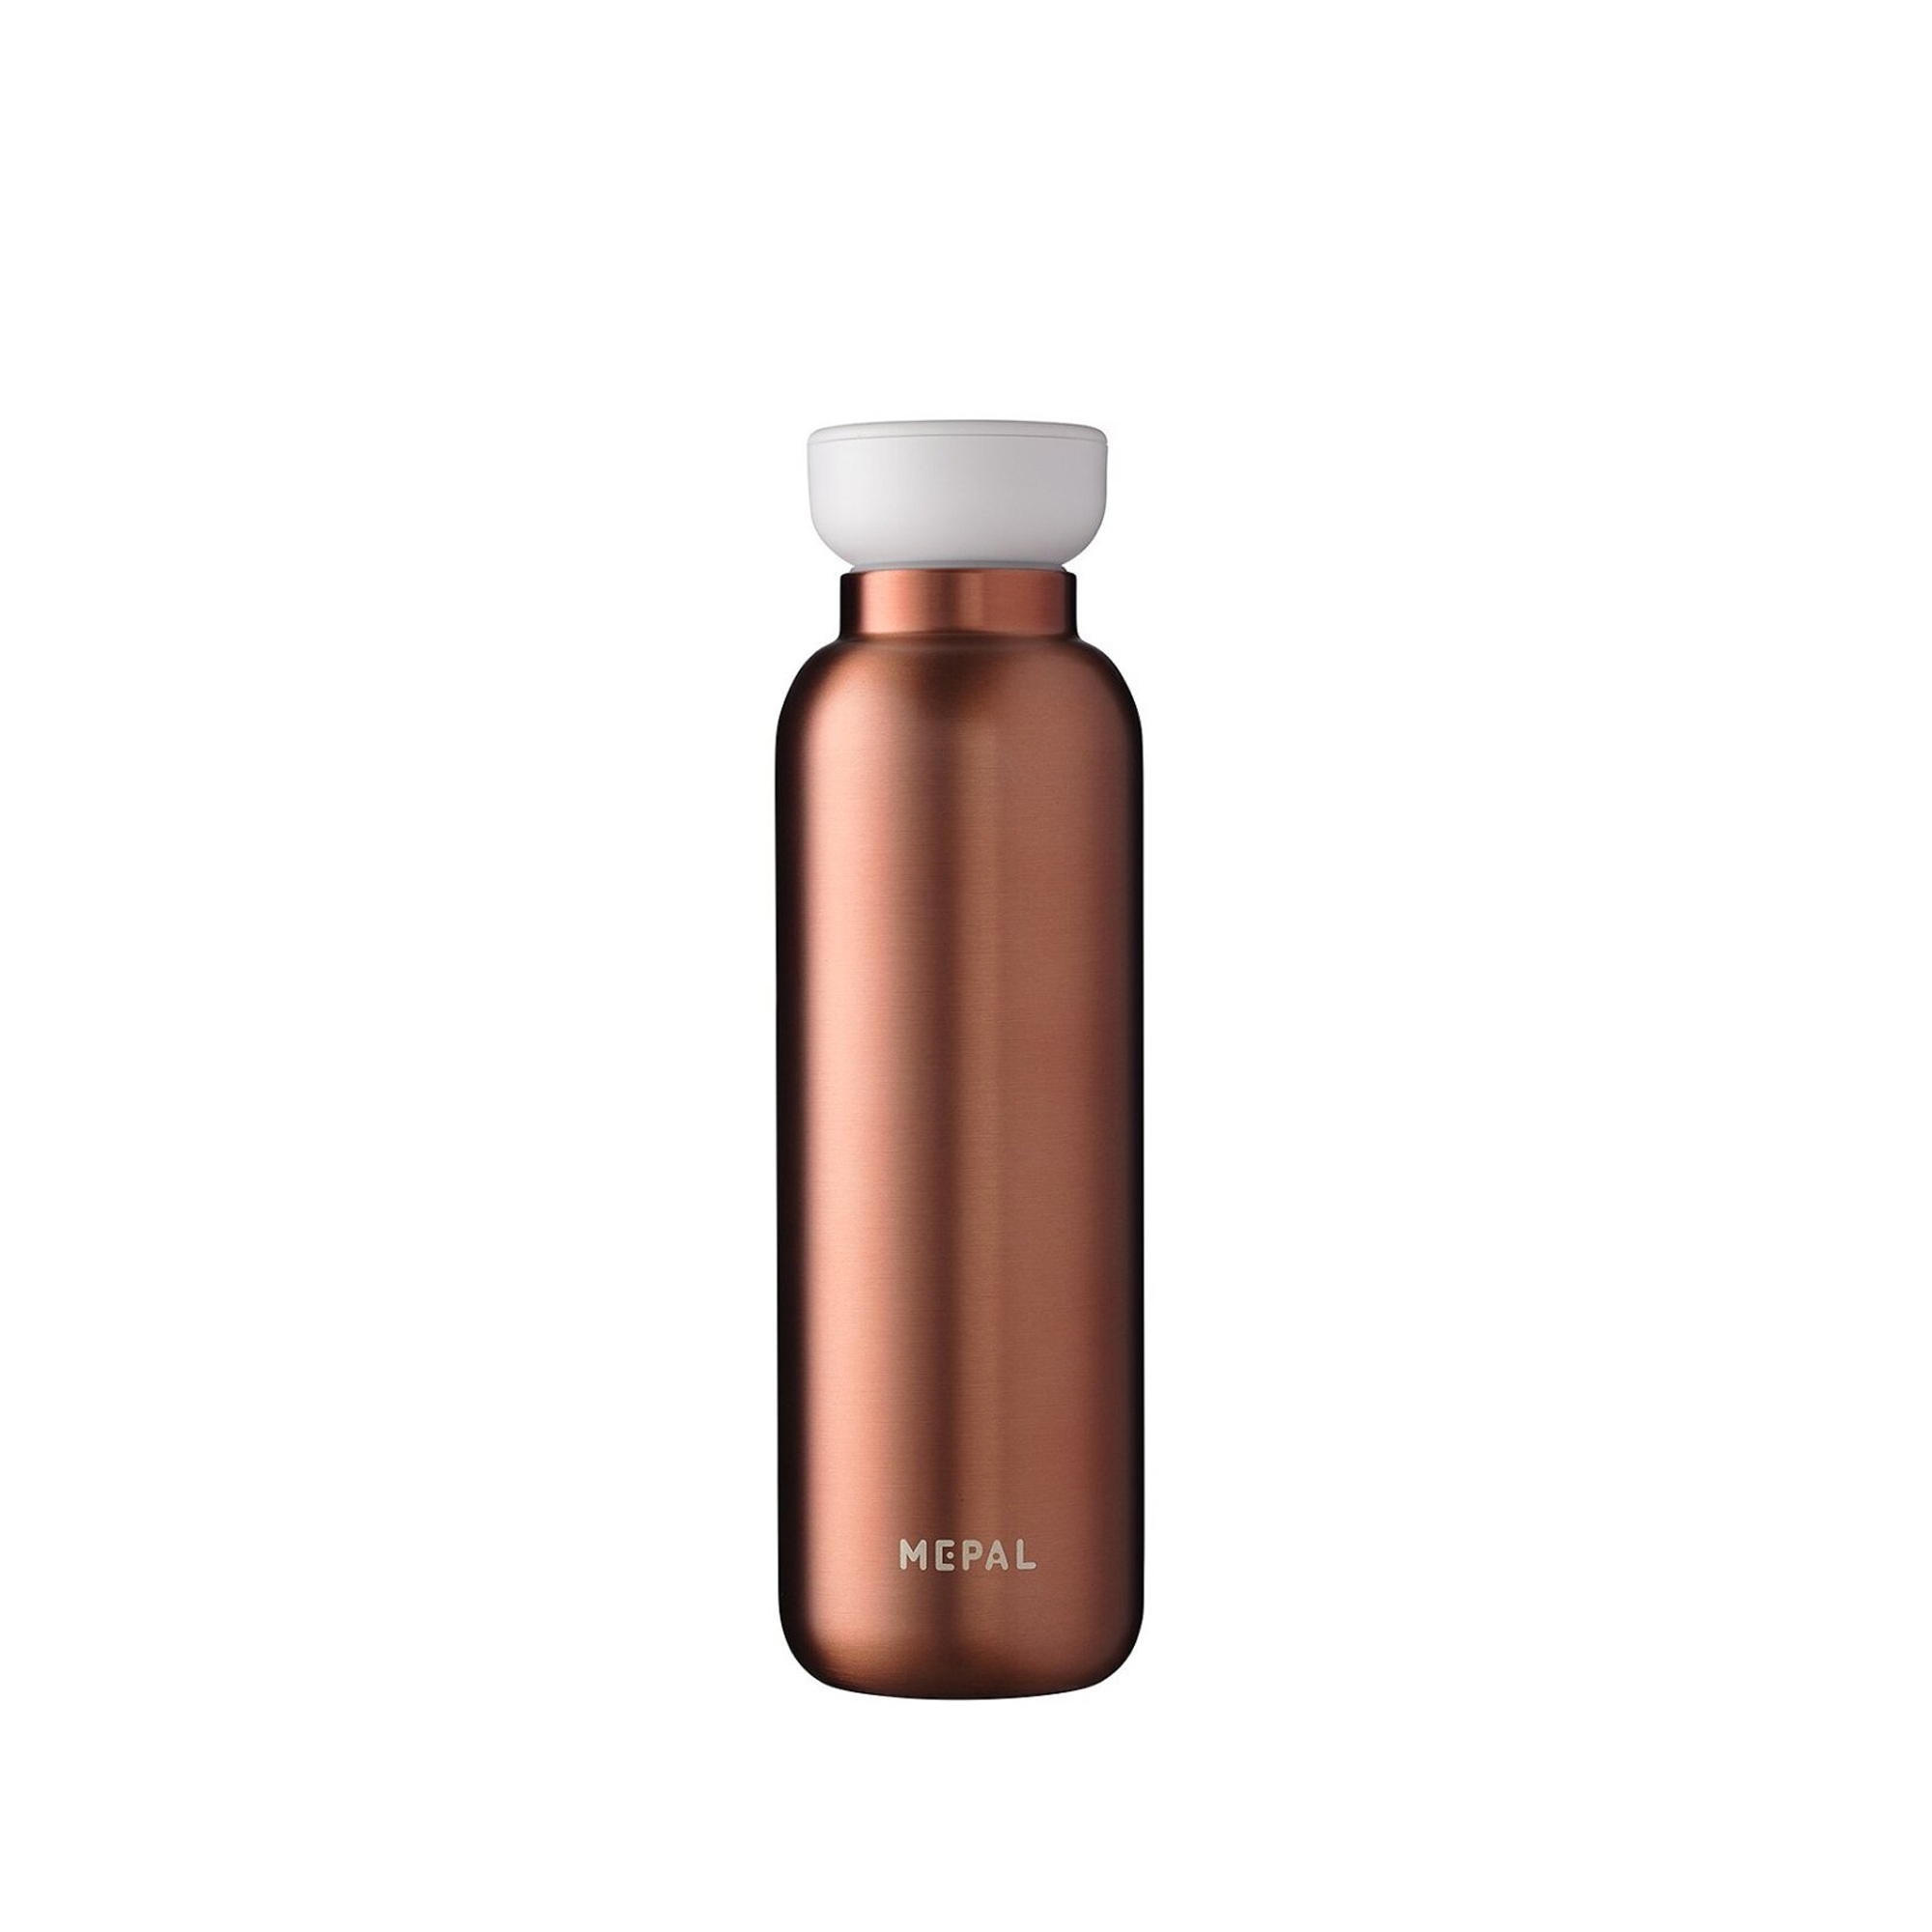 Mepal - Ellipse thermal bottle 500ml - different colors